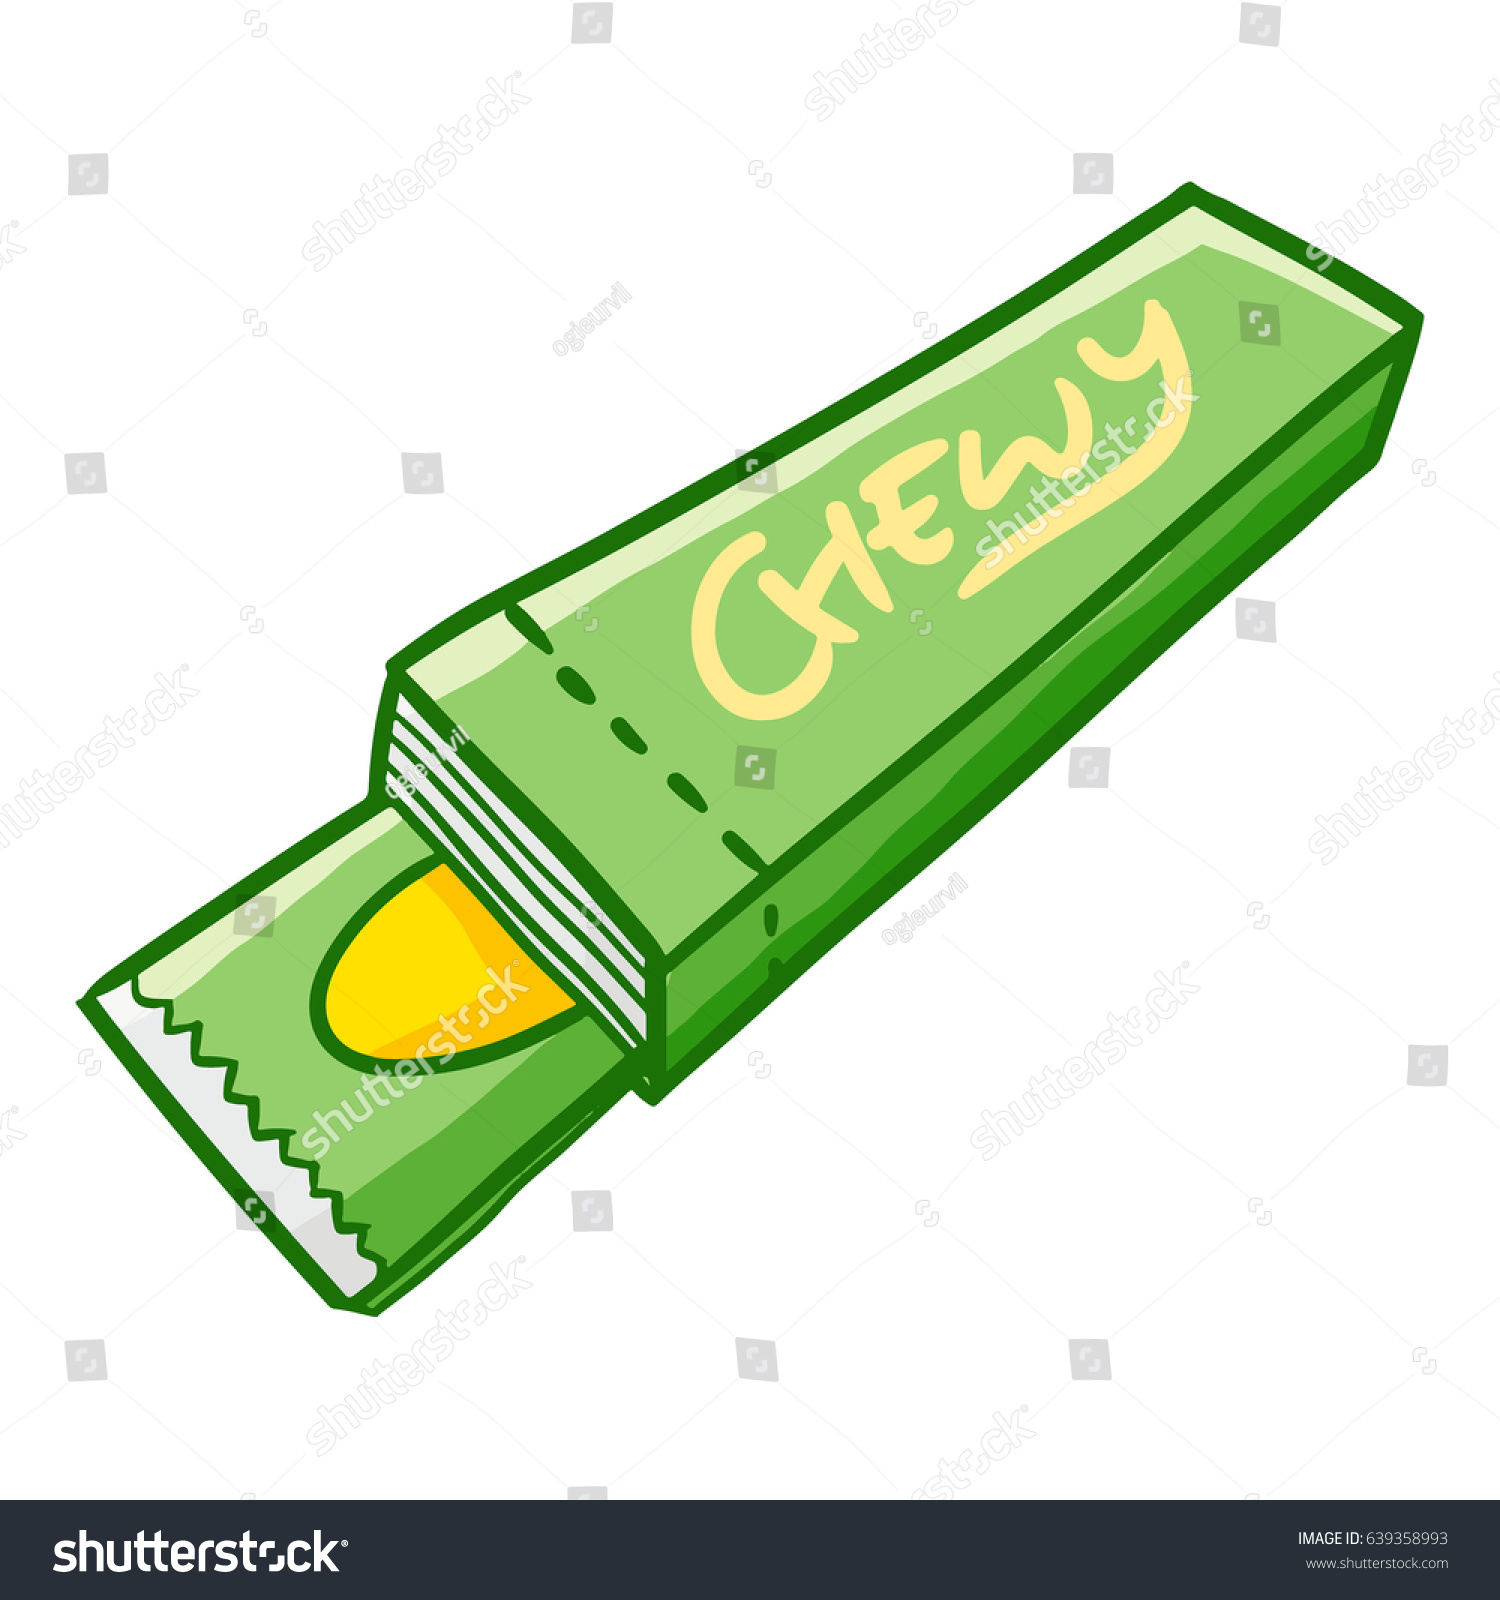 SVG of Funny and cool green chew gum ready to eat - vector. svg